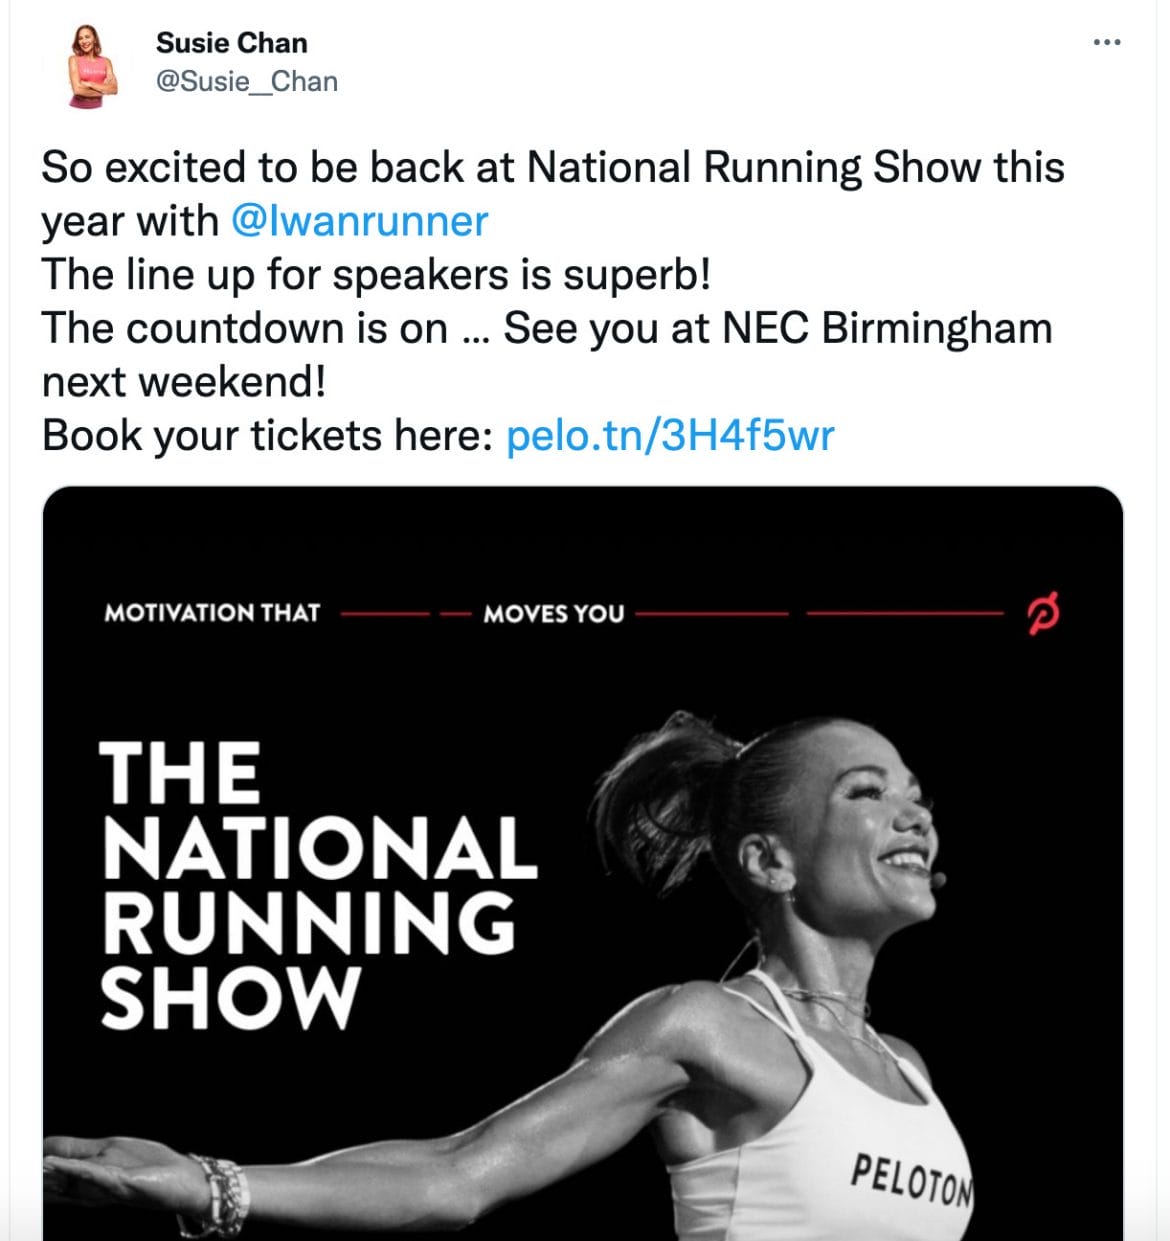 Susie Chan's Tweet announcing host role at 2023 National Running Show Birmingham.